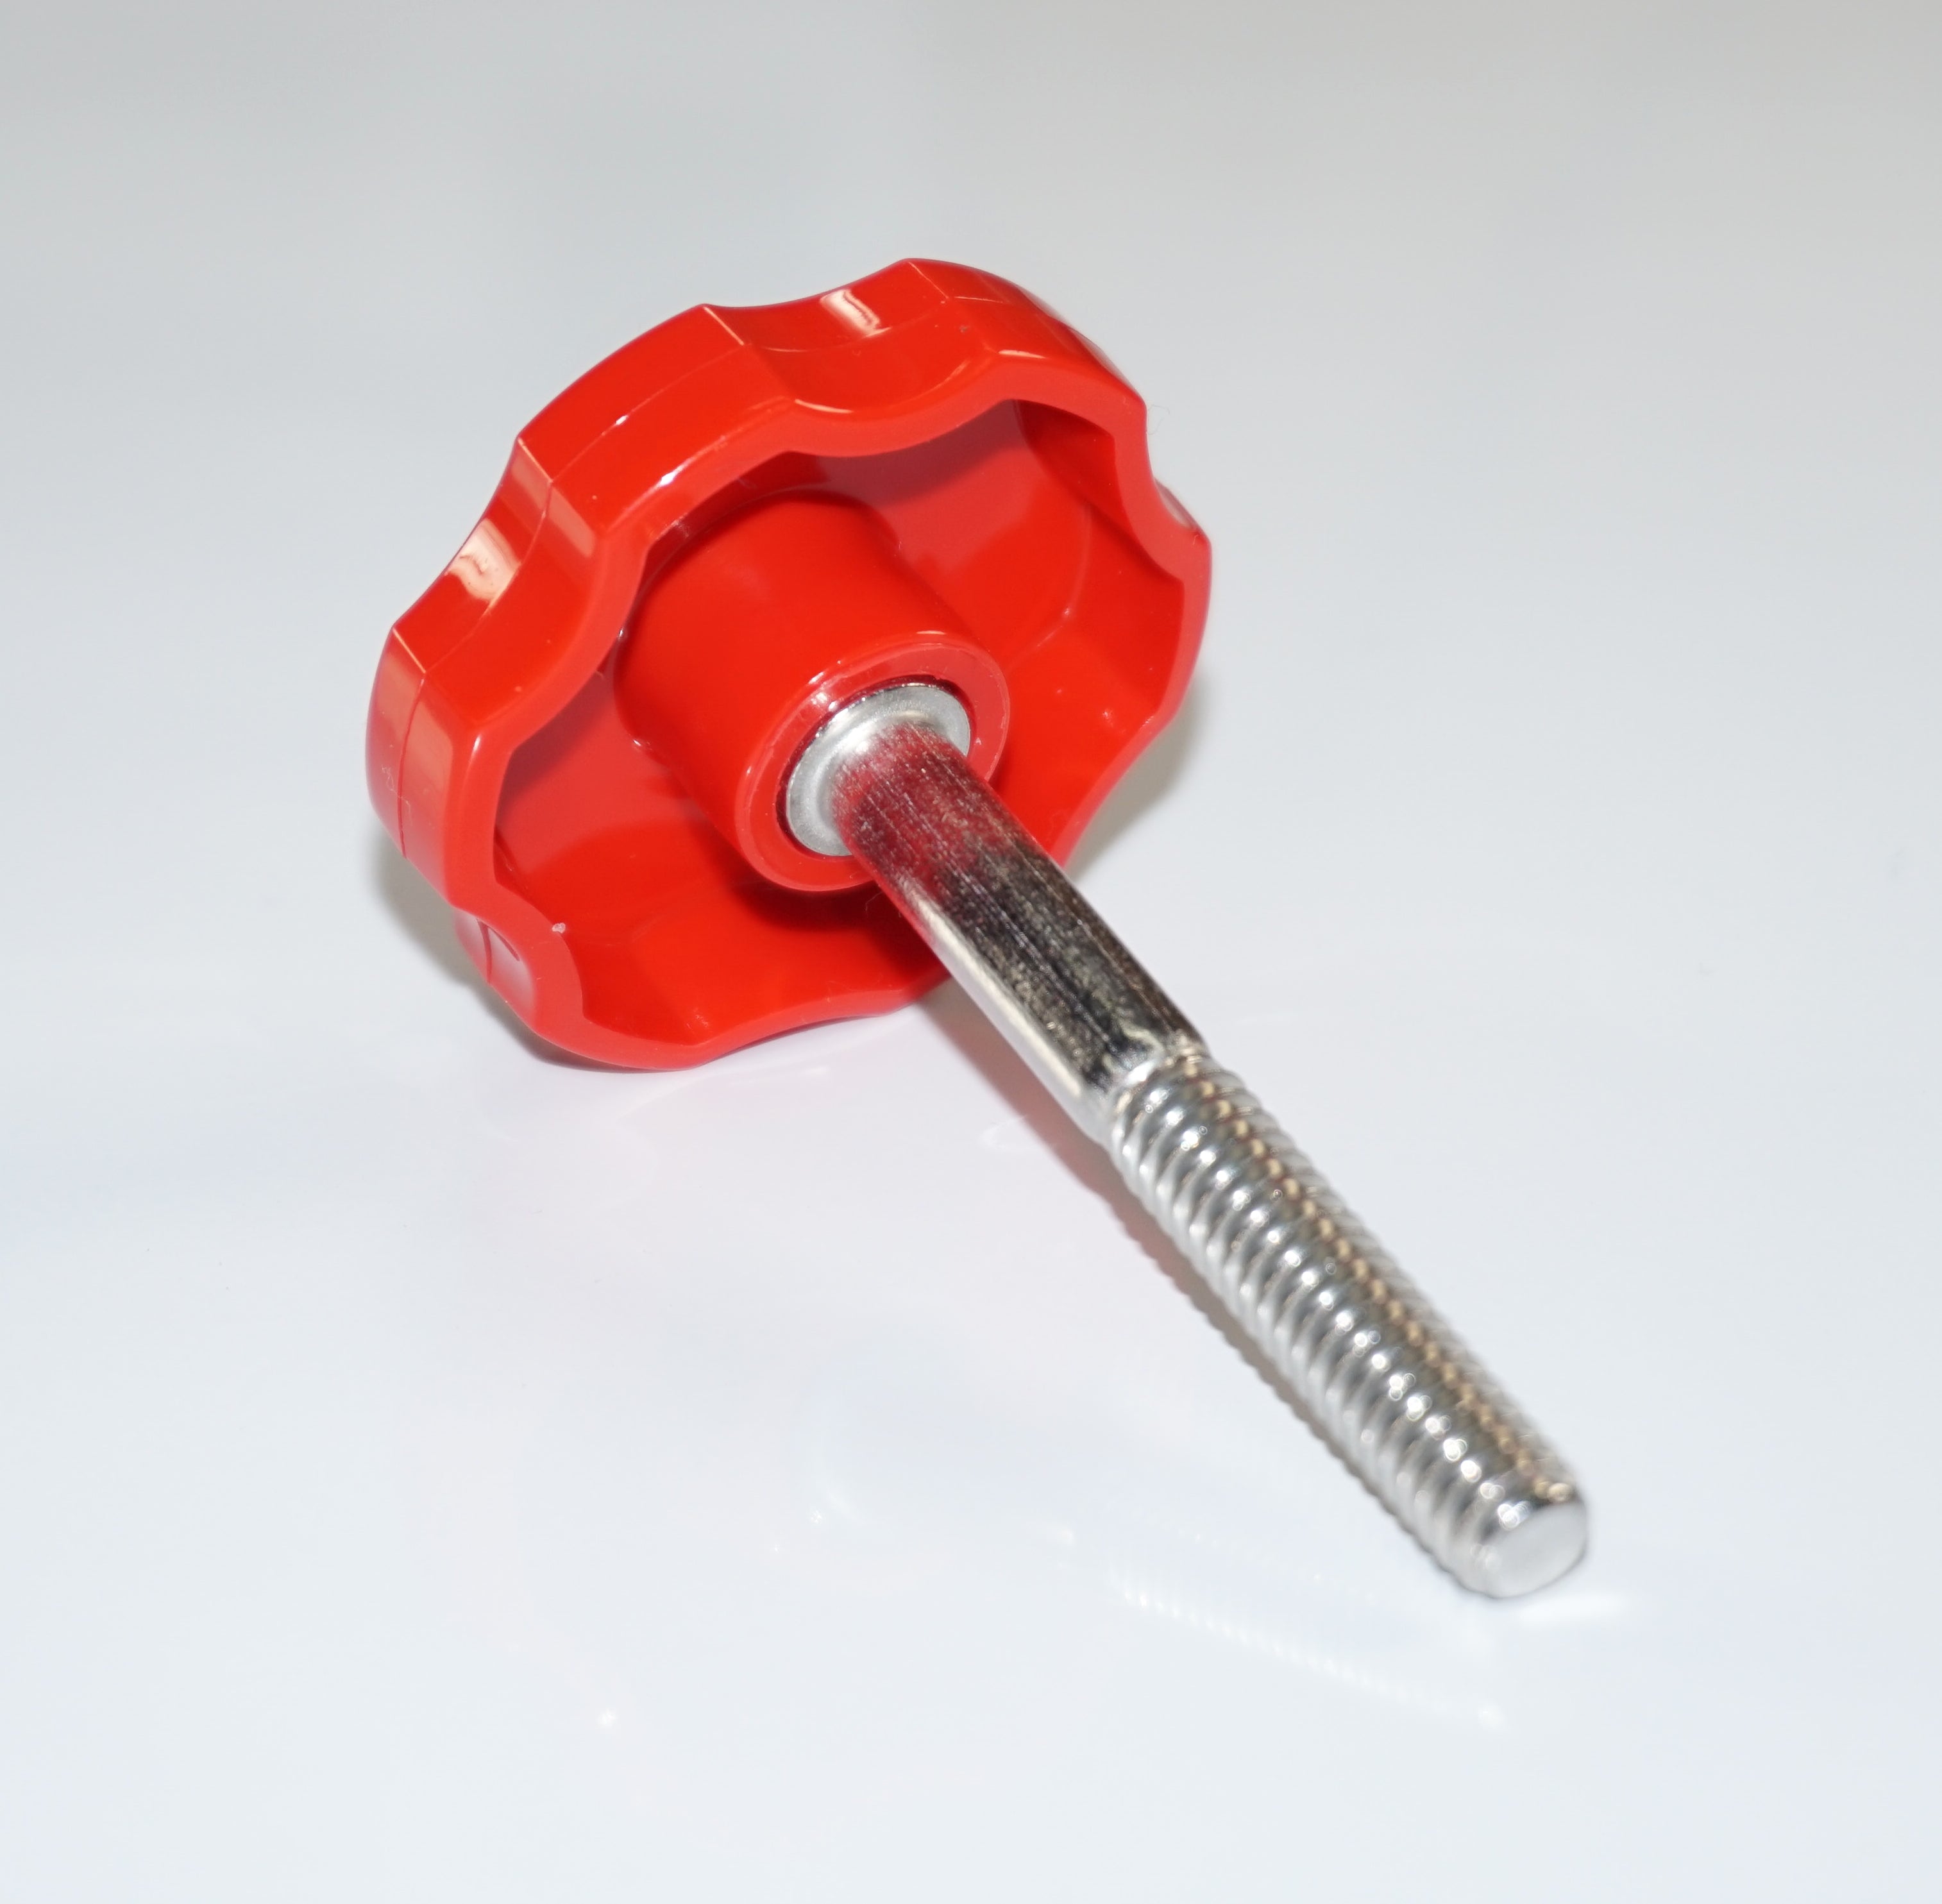 (2-5-10) 1/4"-20 Red Rosette Clamping Thumb Screw Knobs HDsmallPARTS.com